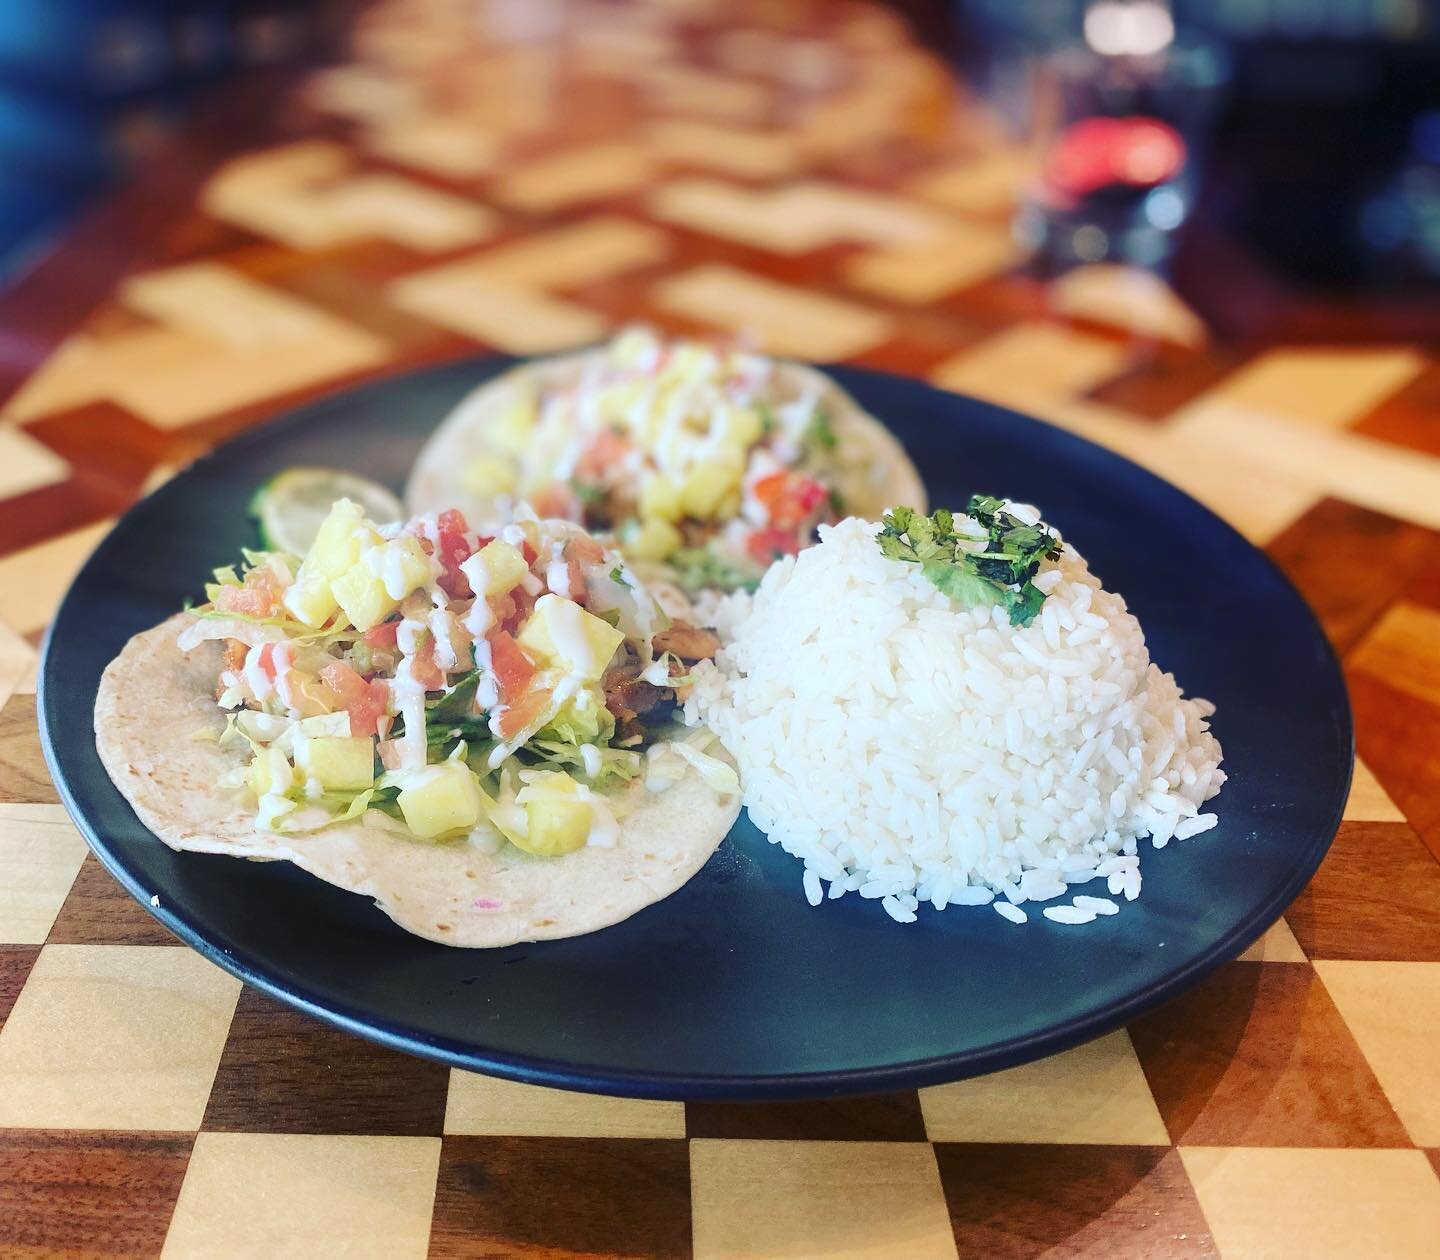 Join us tonight for Mexican Monday! Tonight&rsquo;s special: mango chipotle bbq pork tacos topped with queso and pineapple salsa! Plus fajitas, potato tacos, &amp; $3 margaritas!